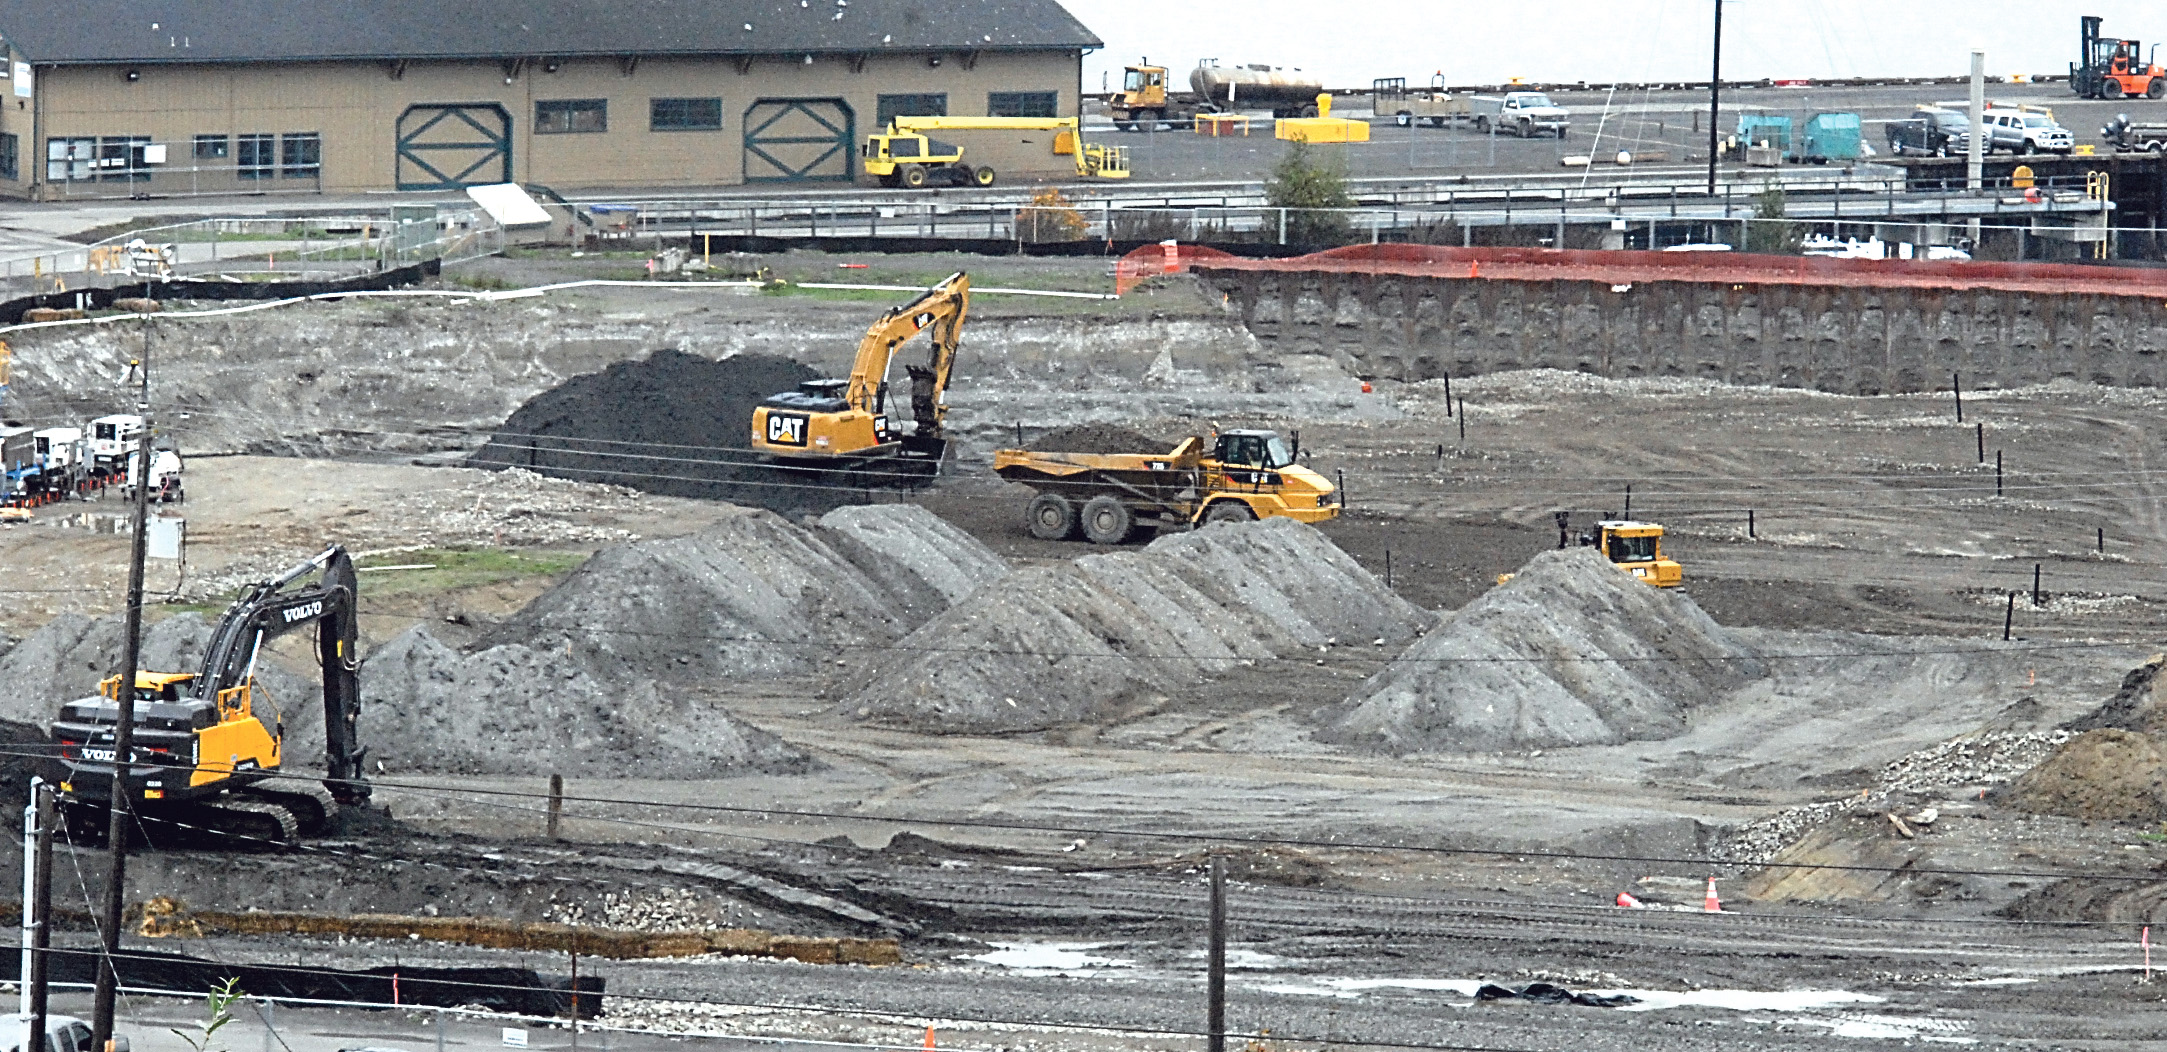 Excavators and bulldozers remove dirt at the site of the former PenPly mill in Port Angeles on Wednesday. Keith Thorpe/Peninsula Daily News